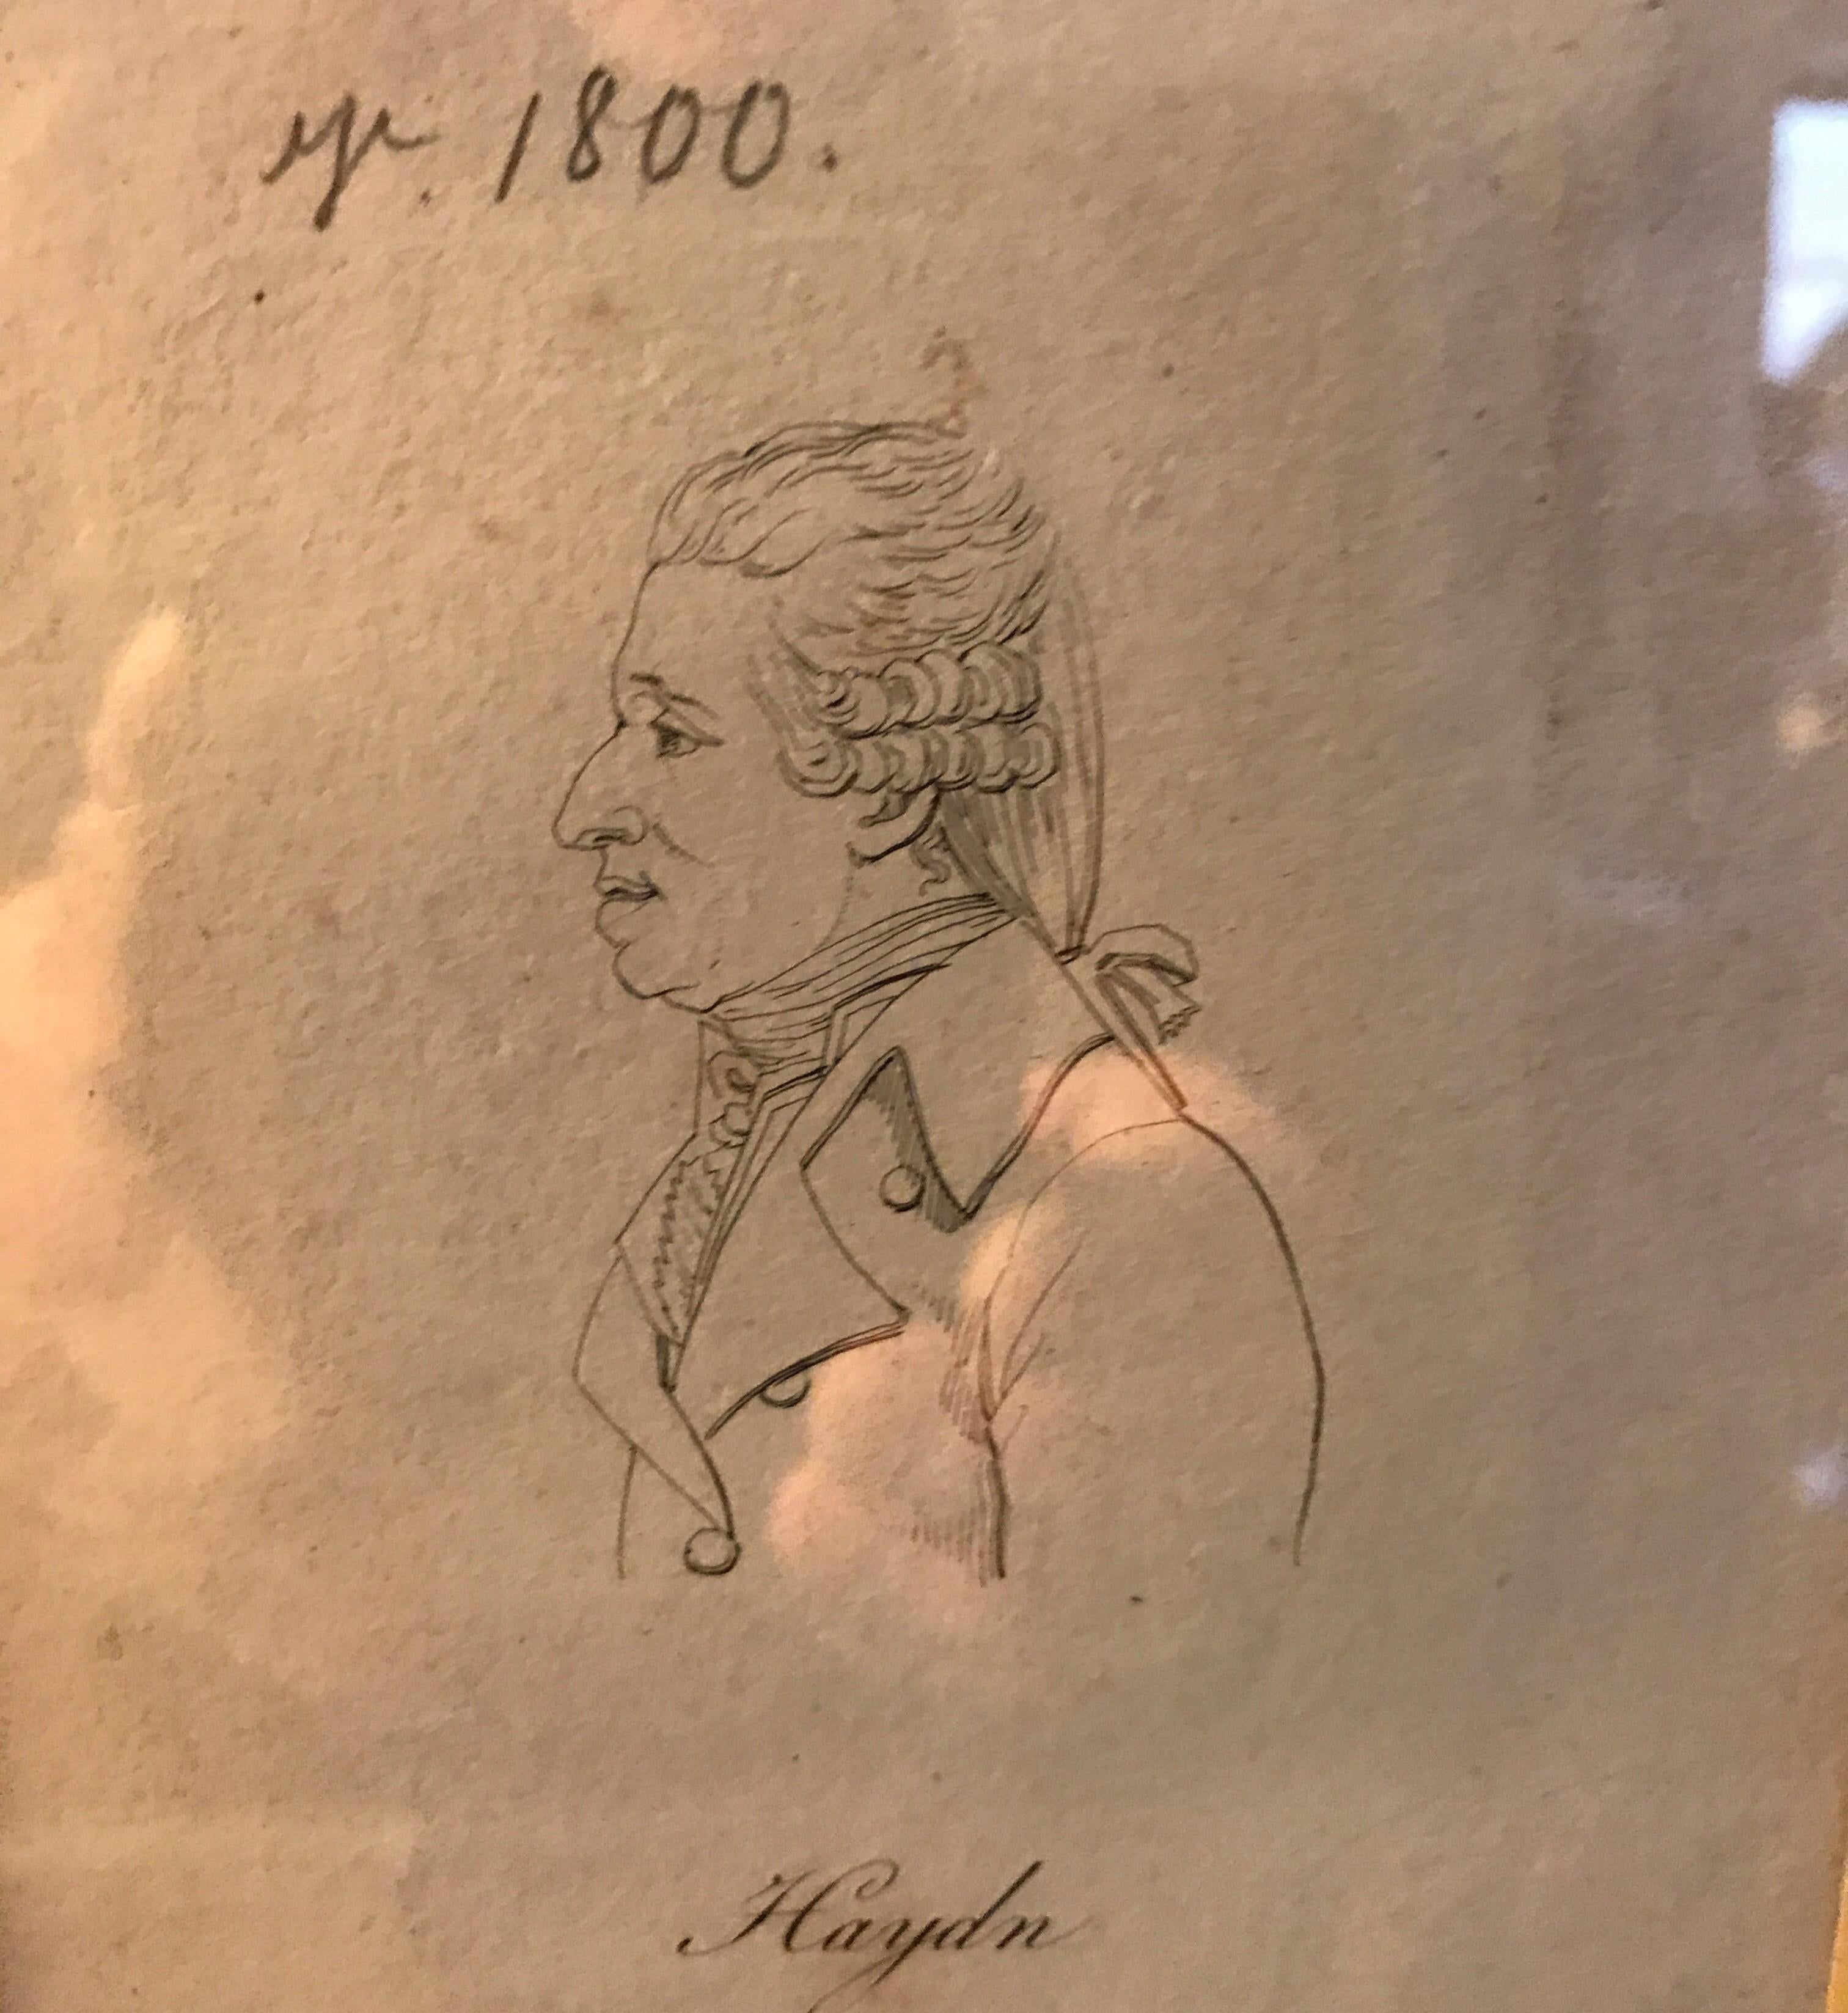 Joseph Haydn engraving dated 1800. The print features his profile.
Joseph Haydn 1732-1809 was a prolific Austrian classical composer.
He was instrumental in the development of chamber music. Haydn
wrote 107 symphonies, 83 string quartets, 45